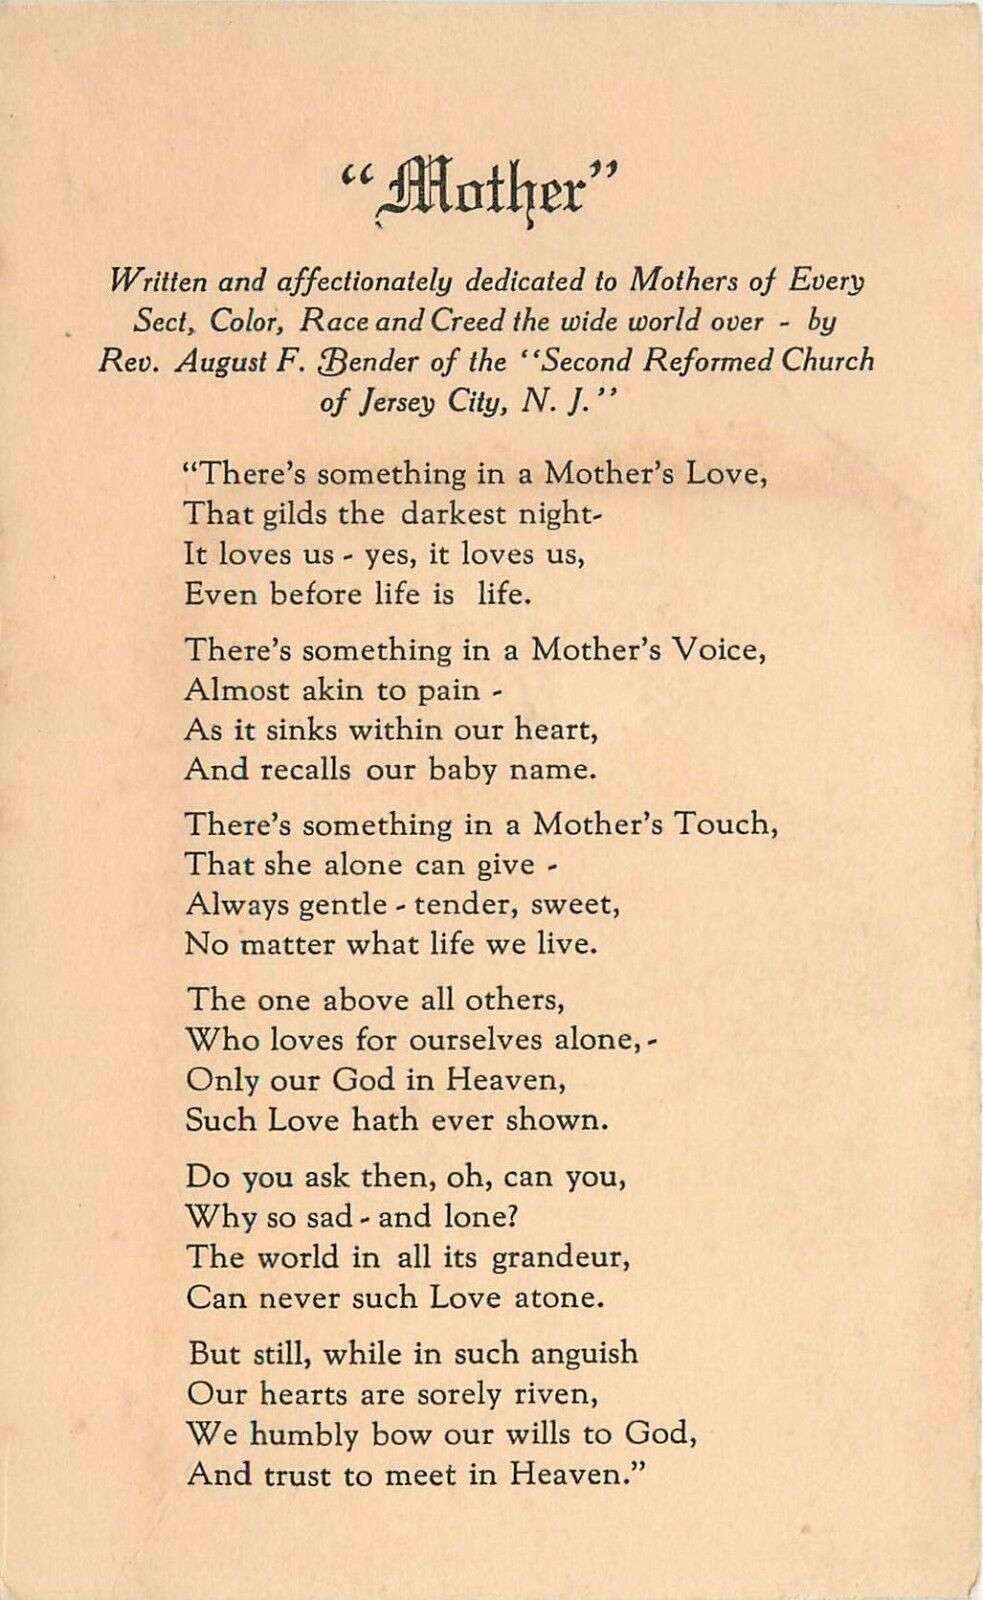 Mother Poem Second Reforned Church of Jersey City New Jersey NJ August Bender